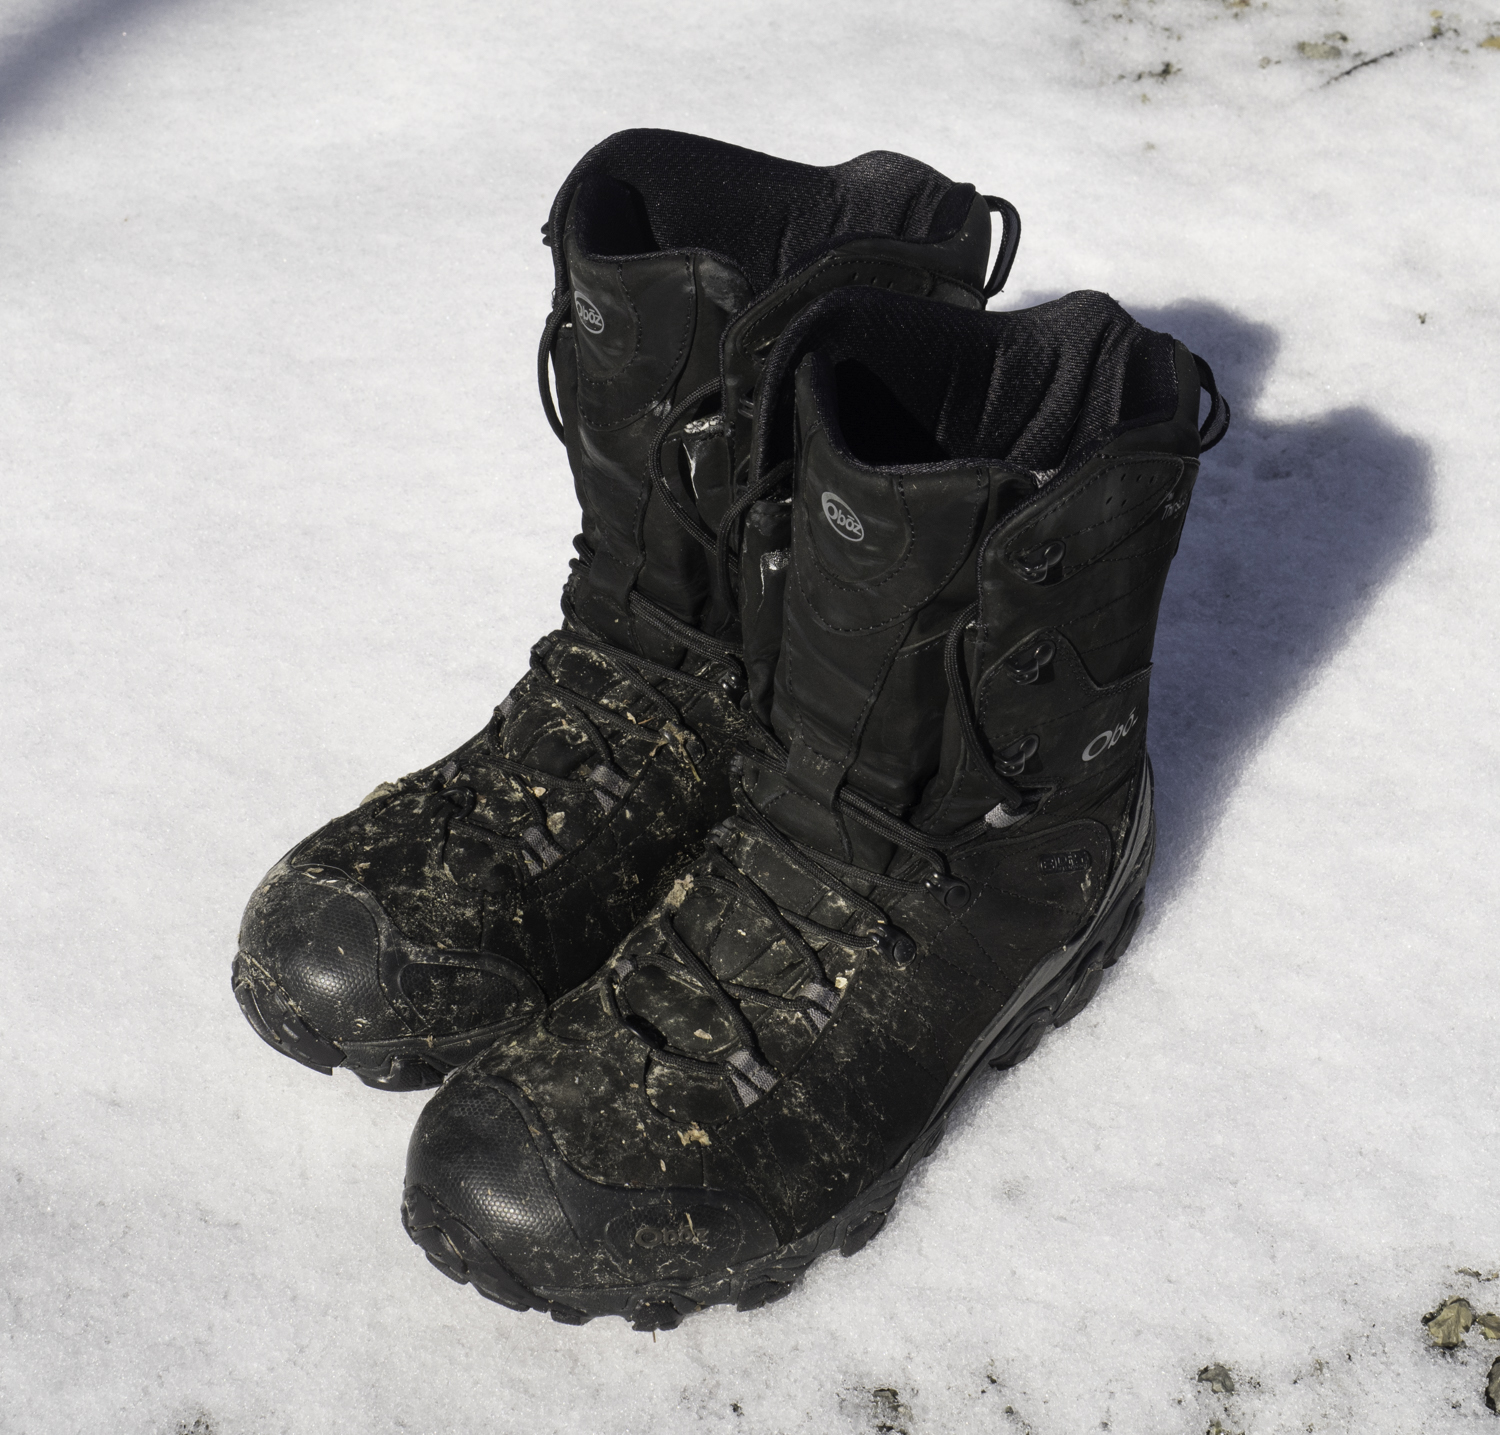 Oboz Bridger 10″ Insulated Boots Mid Term Review